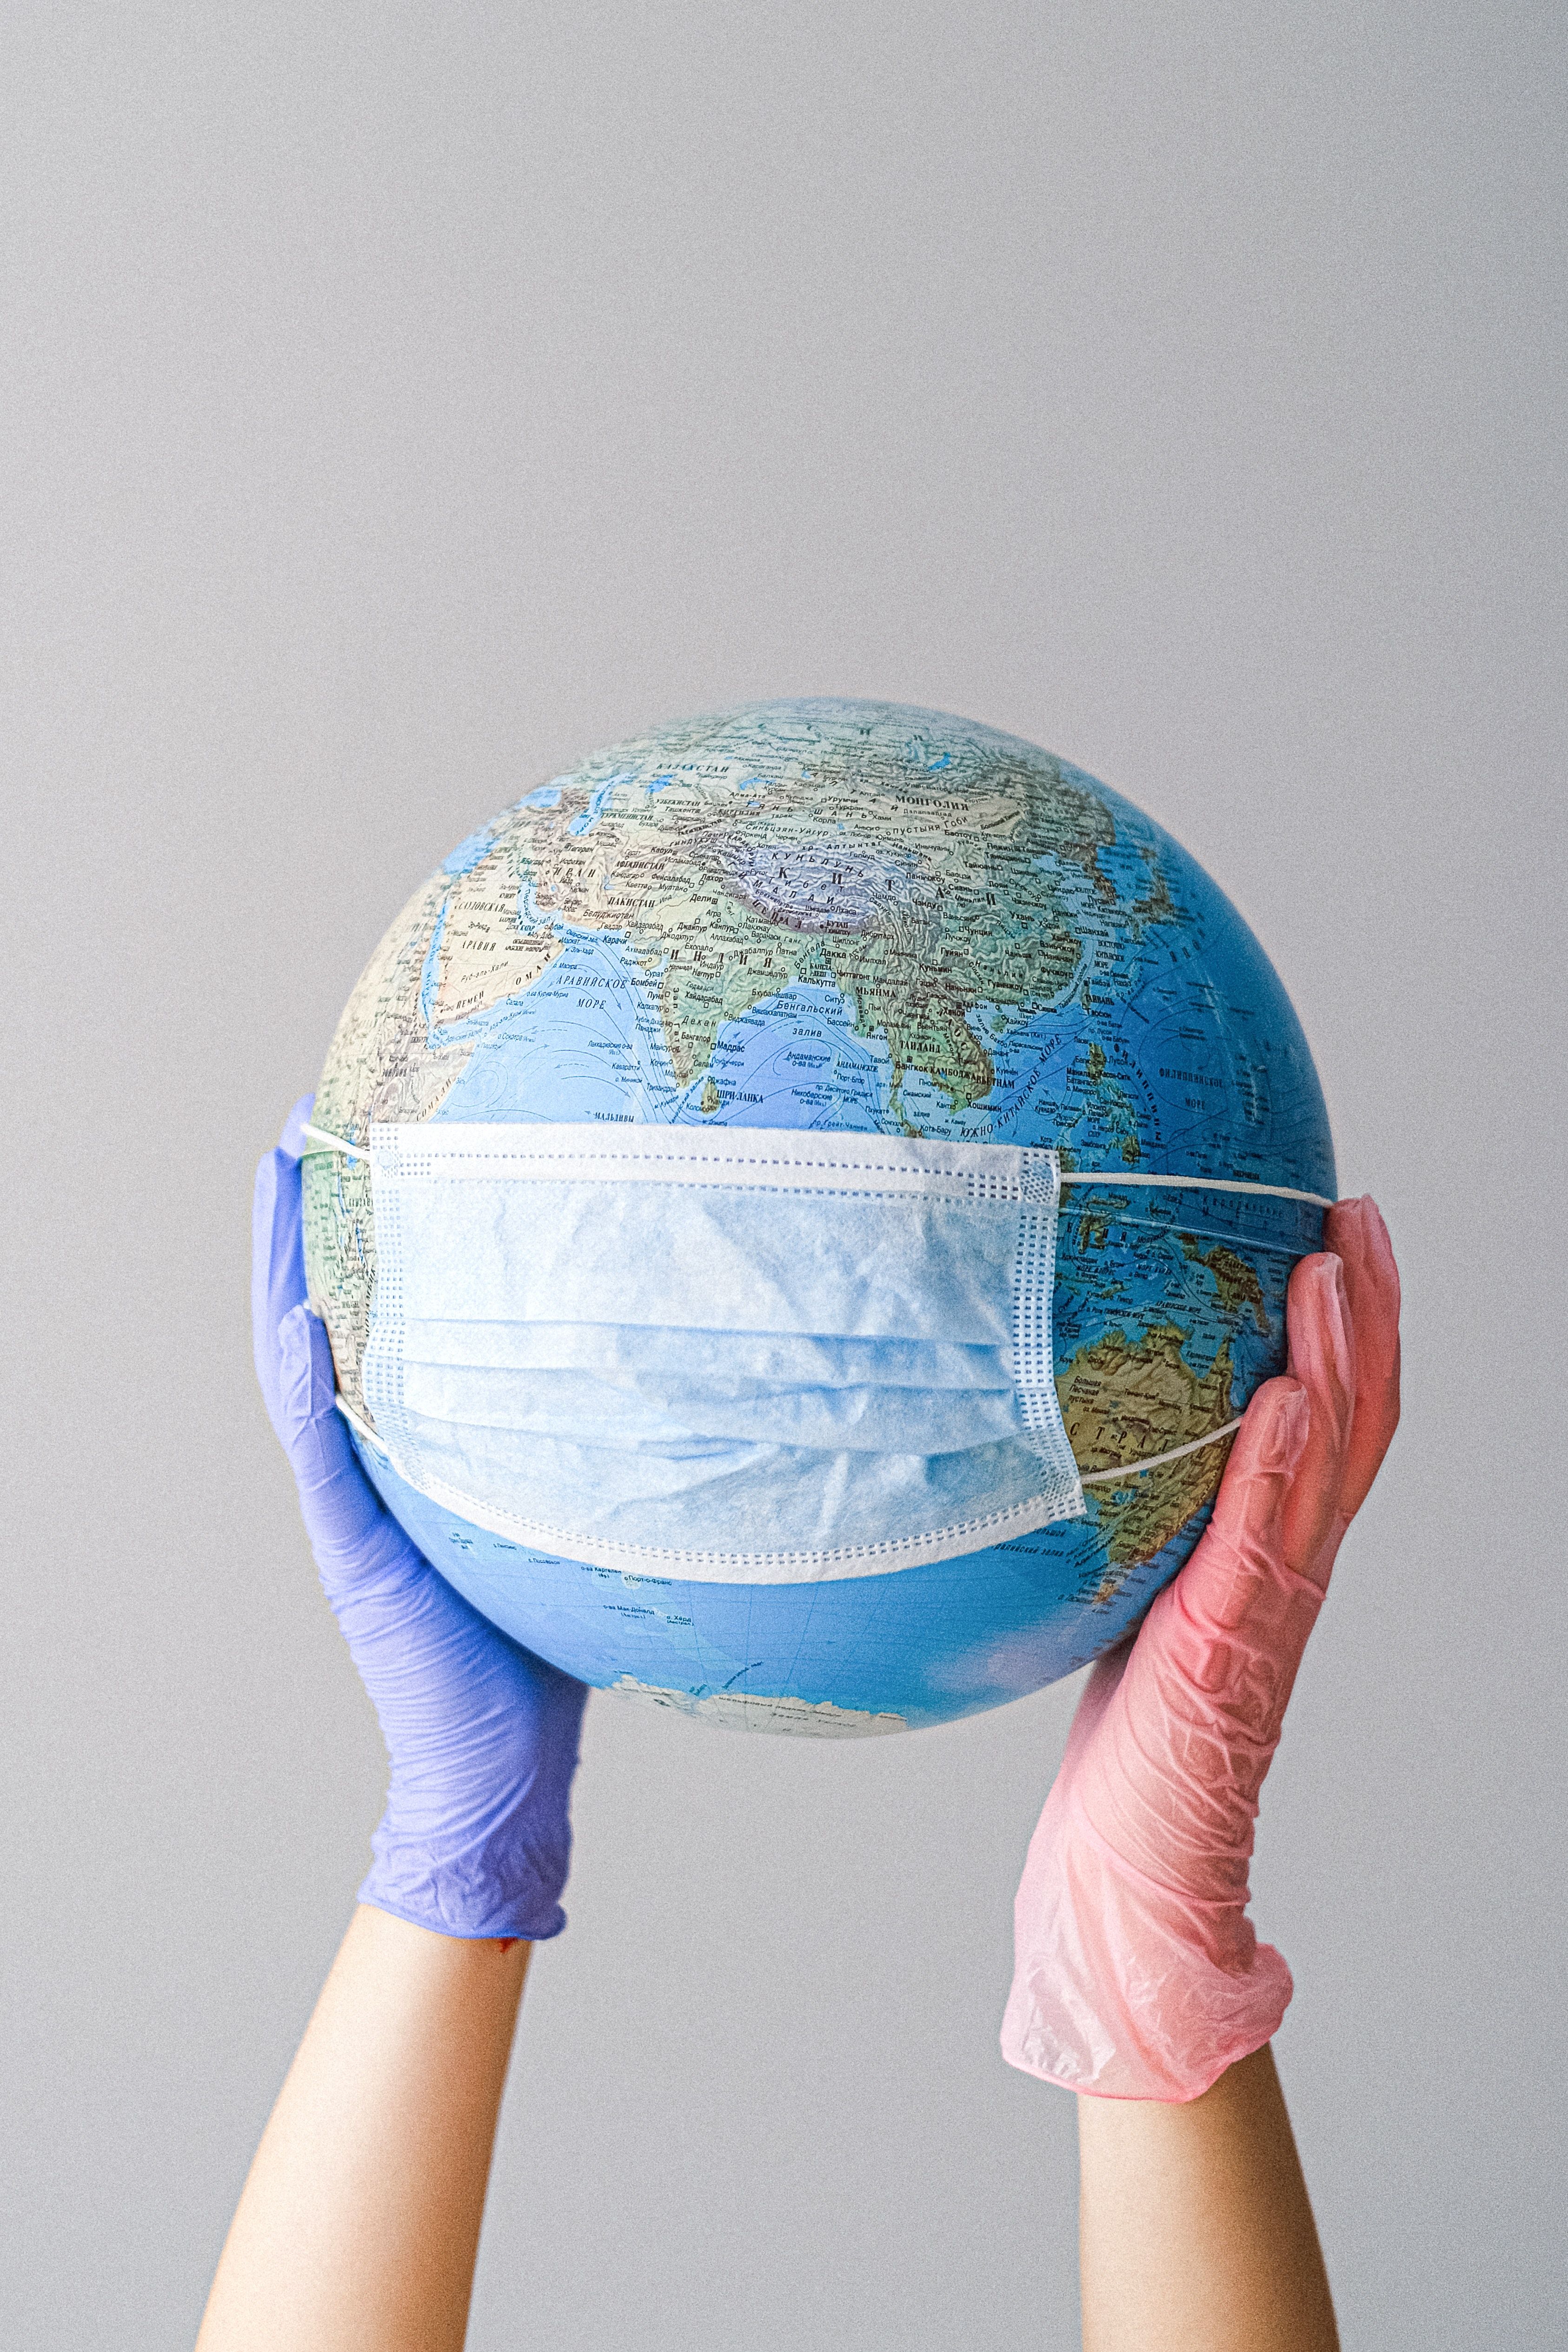 Hands With Latex Gloves Holding a Globe with a Face Mask · Free